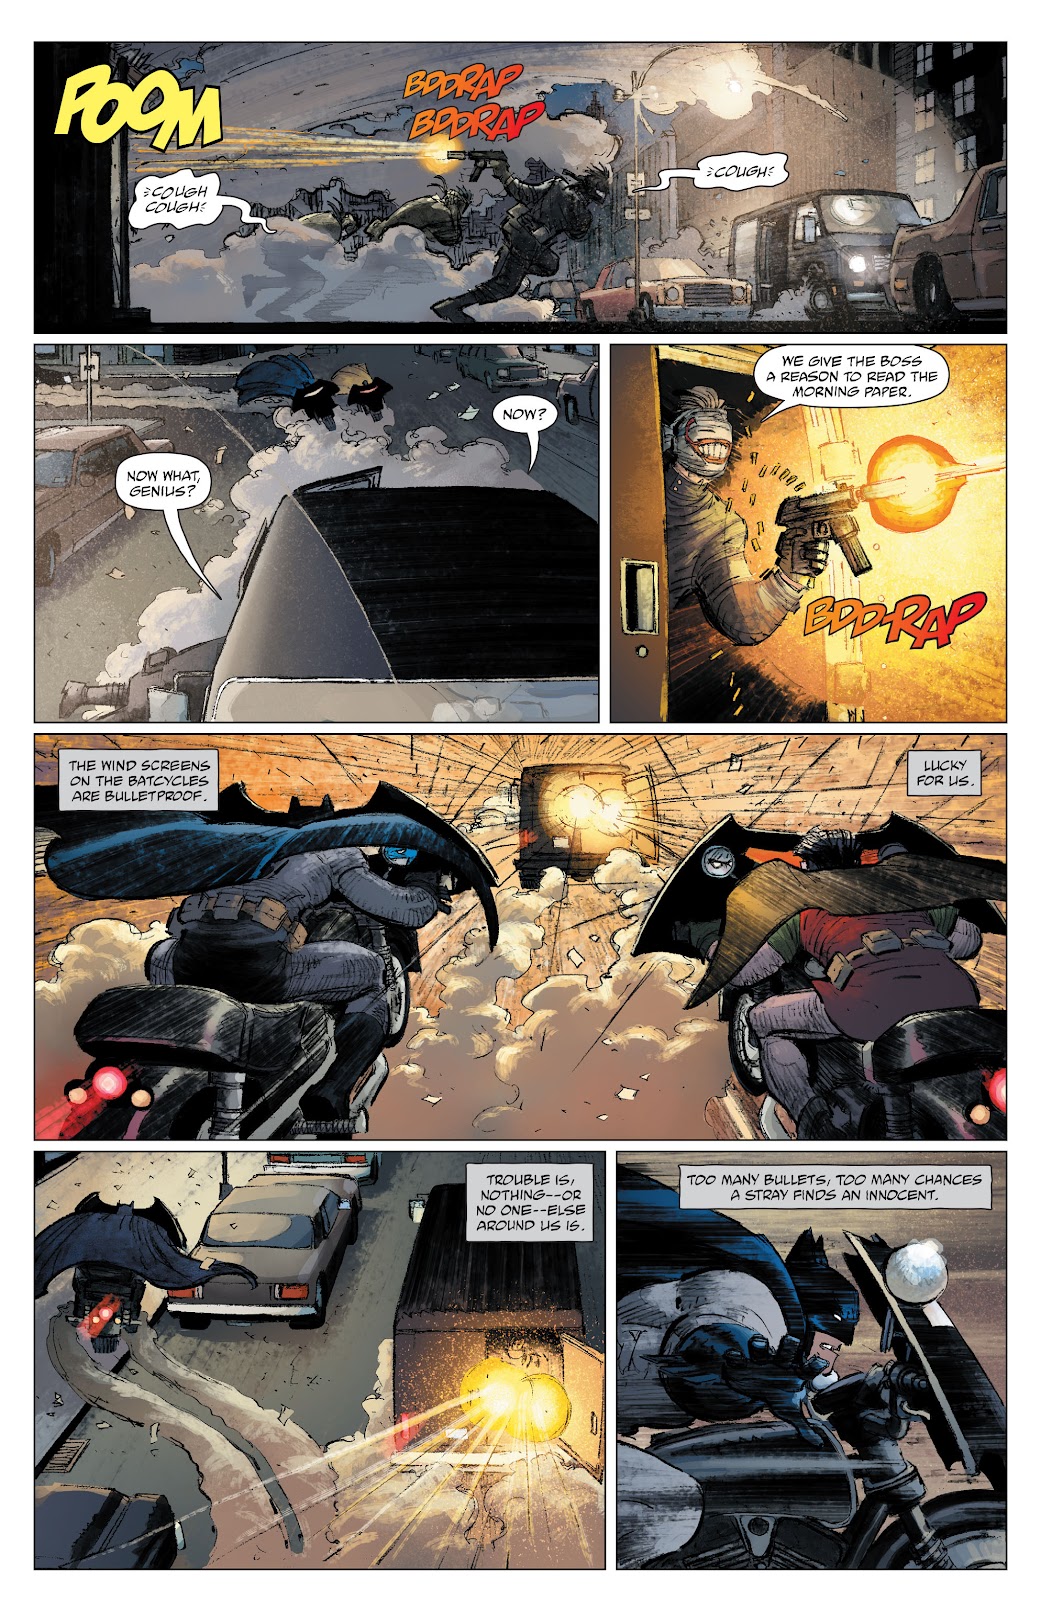 Read The Dark Knight Returns: The Last Crusade Issue #Full Online Page 18